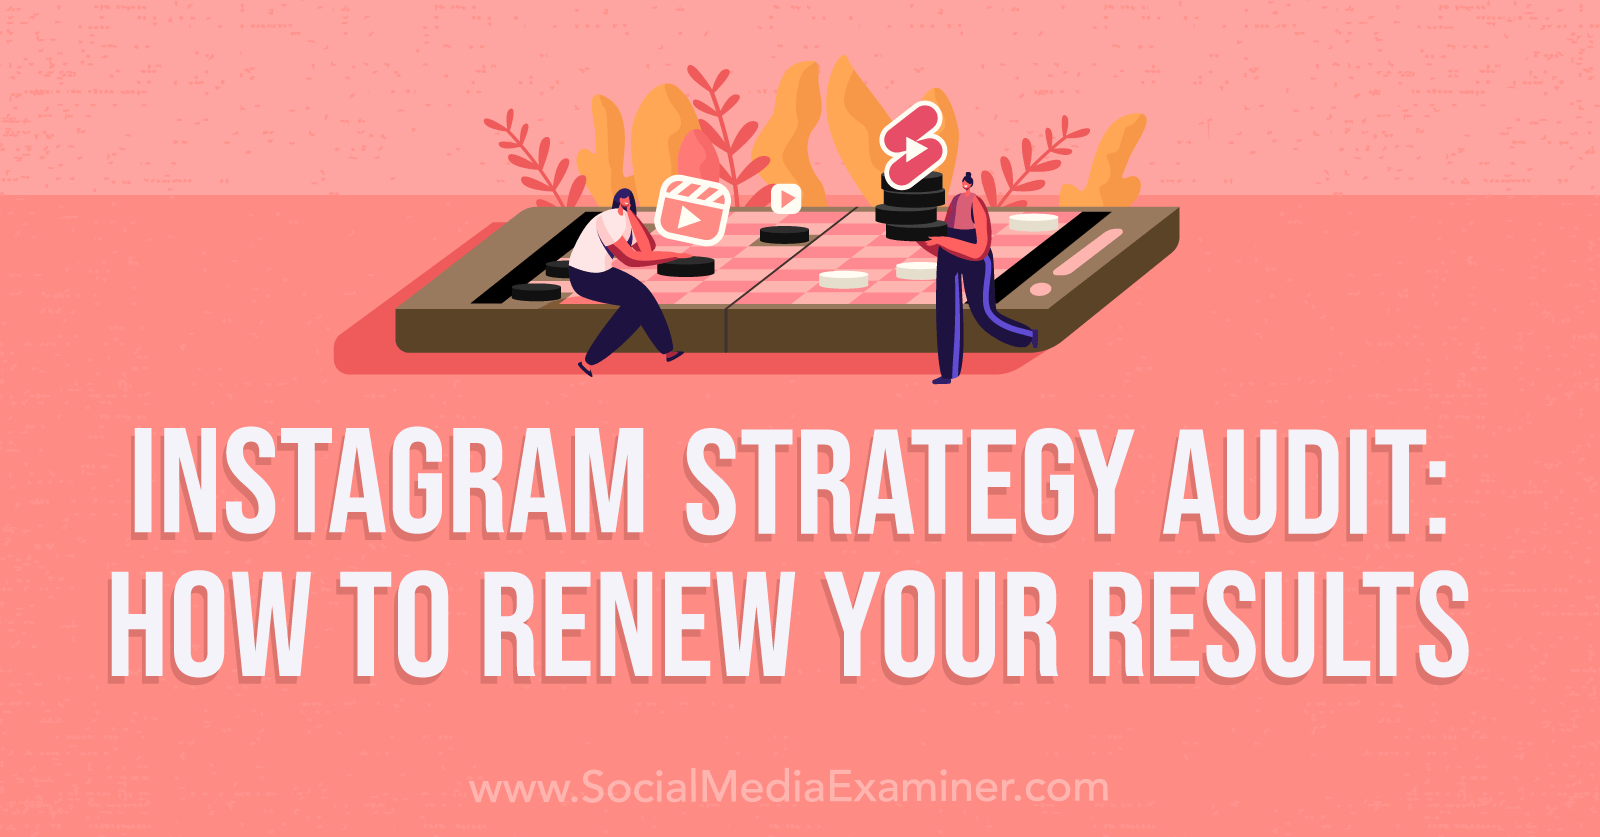 Instagram Strategy Audit: How to Renew Your Results-Social Media Examiner